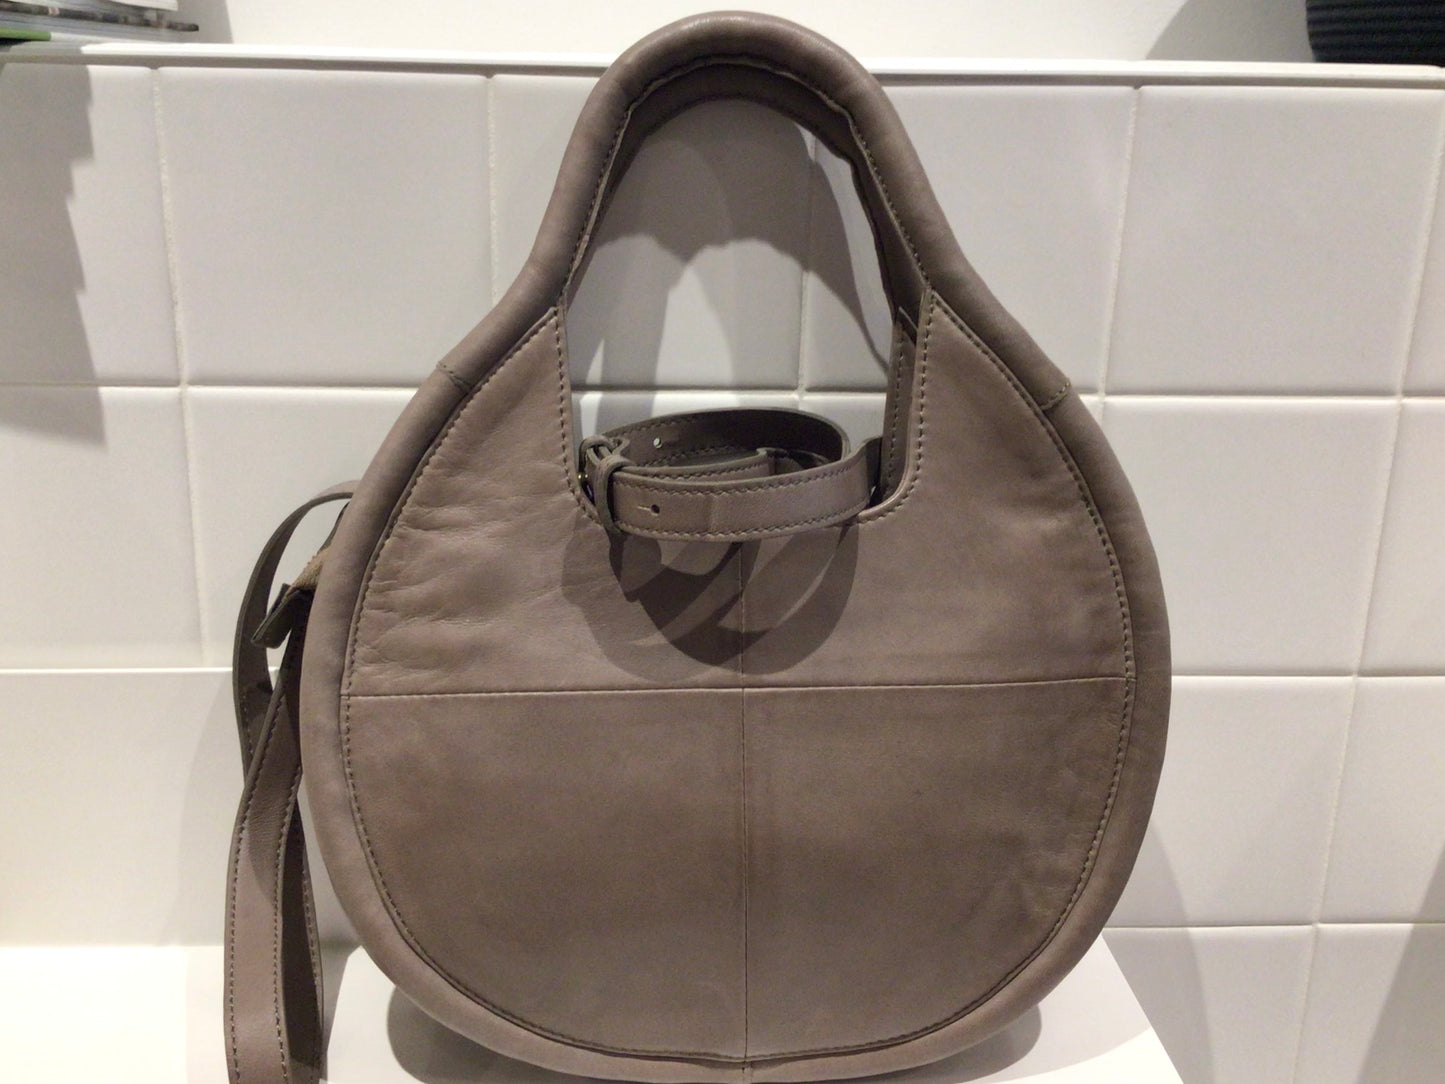 Consignment 5117-07 Anthropologie round brown leather bag.